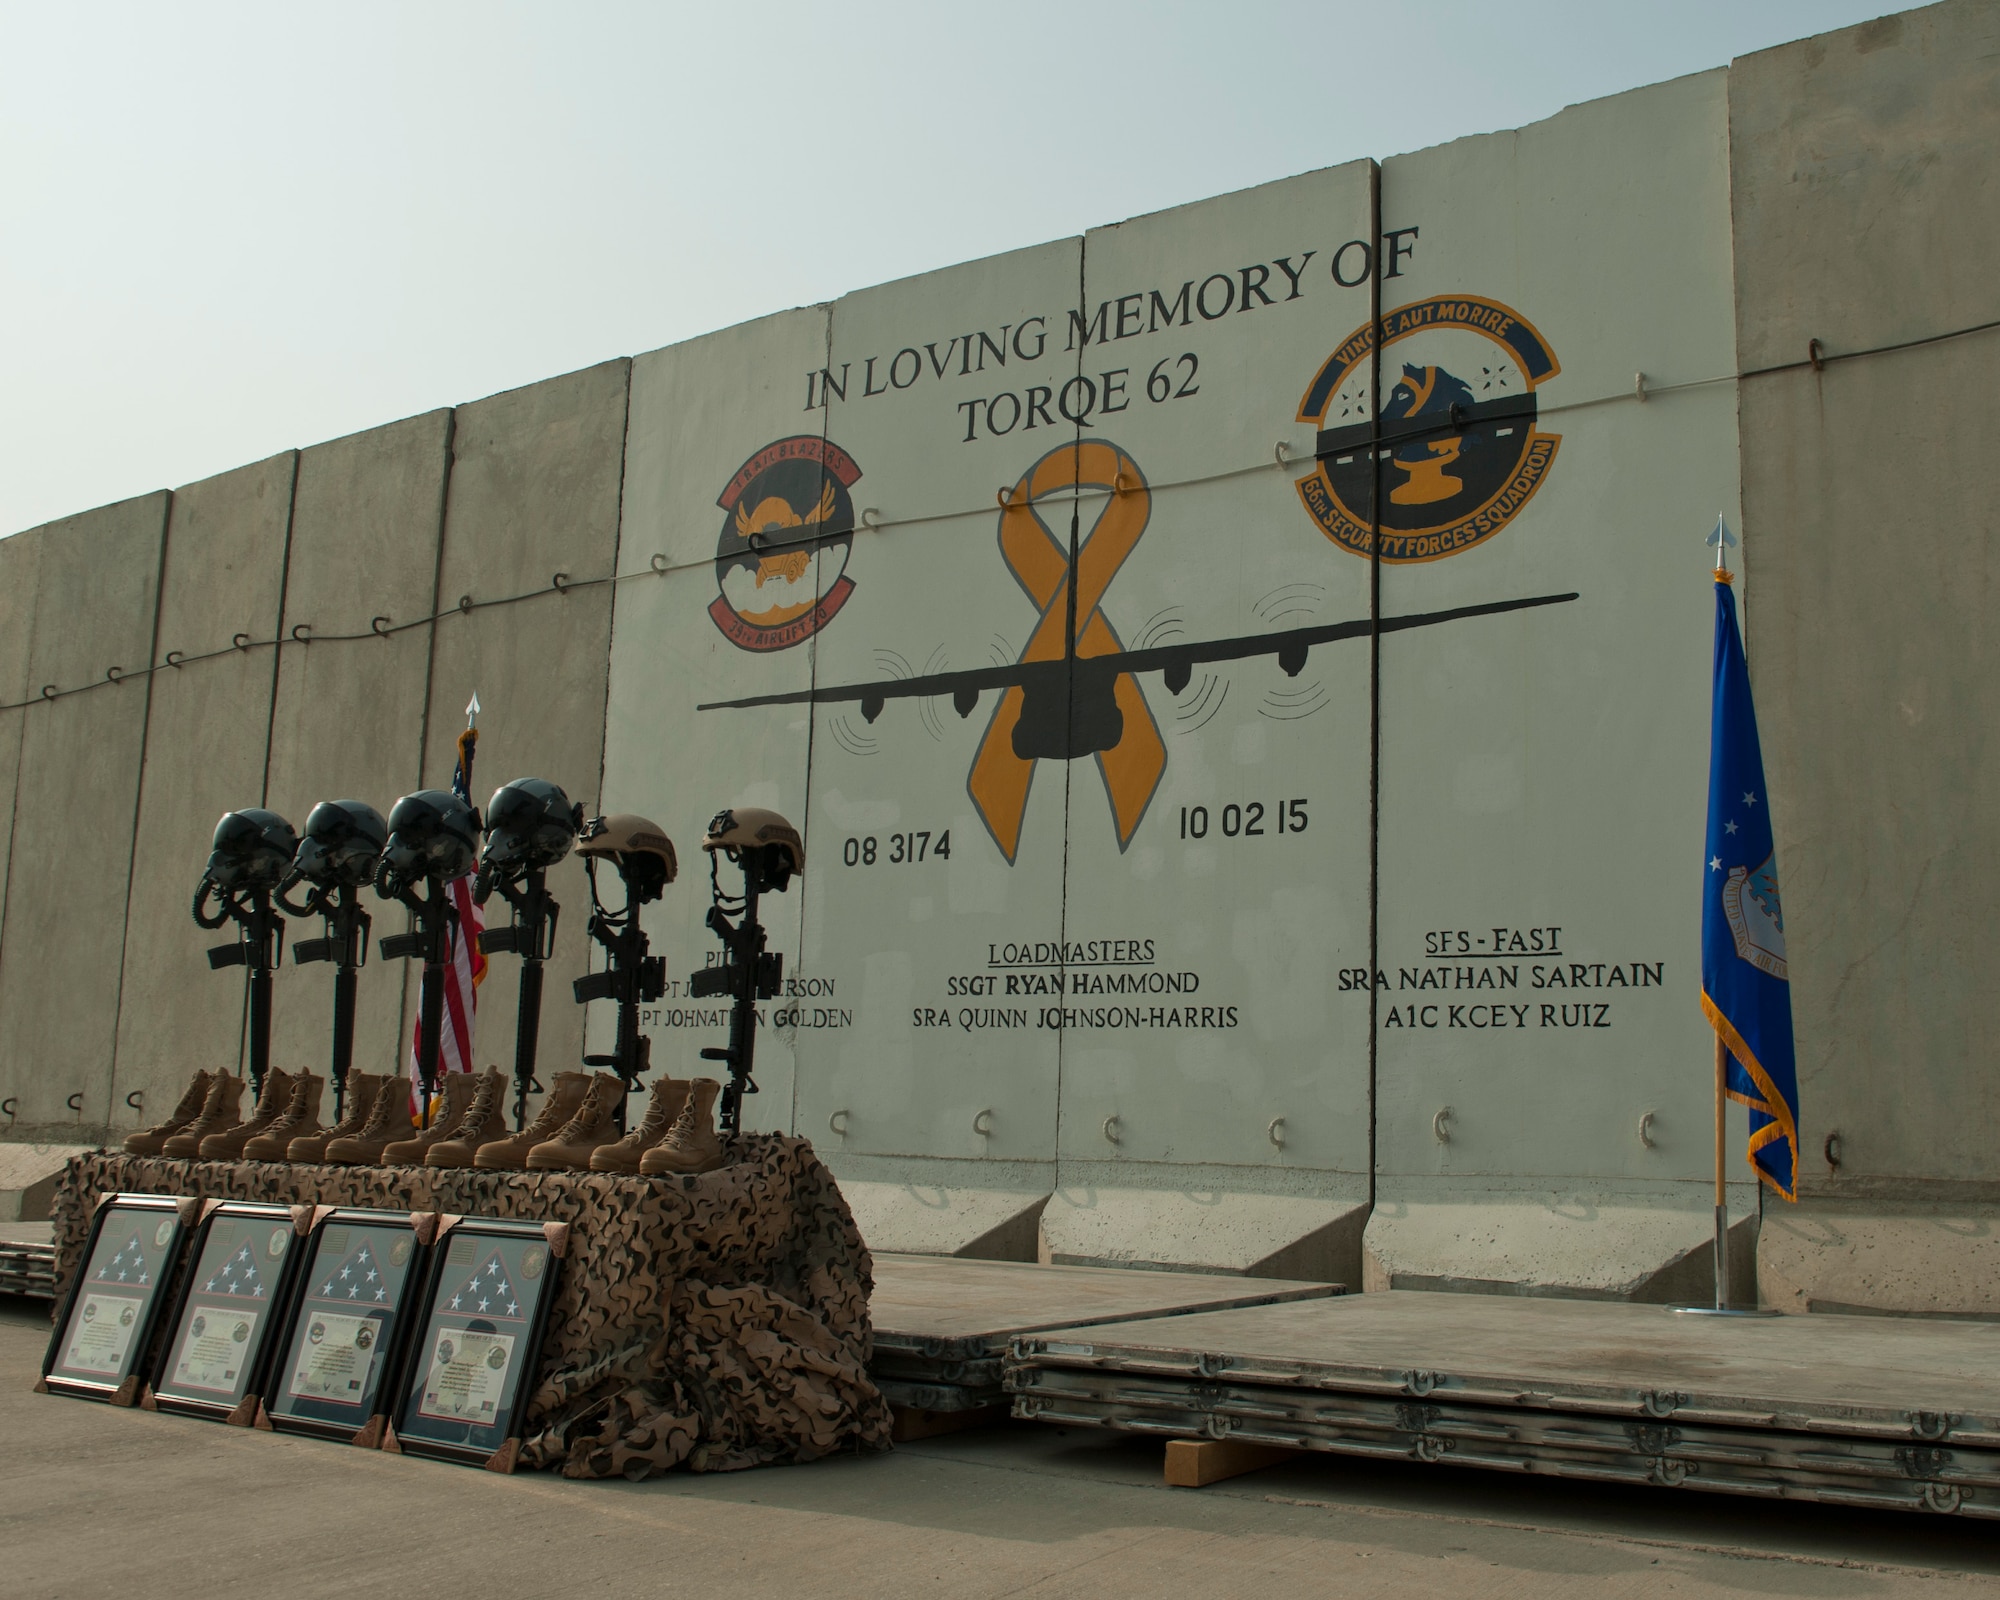 Battlefield crosses representing the six Airmen lost during a C-130J crash, are placed in front of a mural in memory of TORQE 62, Bagram Airfield, Afghanistan, Oct. 2, 2016. A ceremony was held to remember and honor the live lost when TORQE 62 crash during takeoff at Jalalabad Airfield, Afghanistan, Oct. 2, 2015. (U.S. Air Force photo by Capt. Korey Fratini)